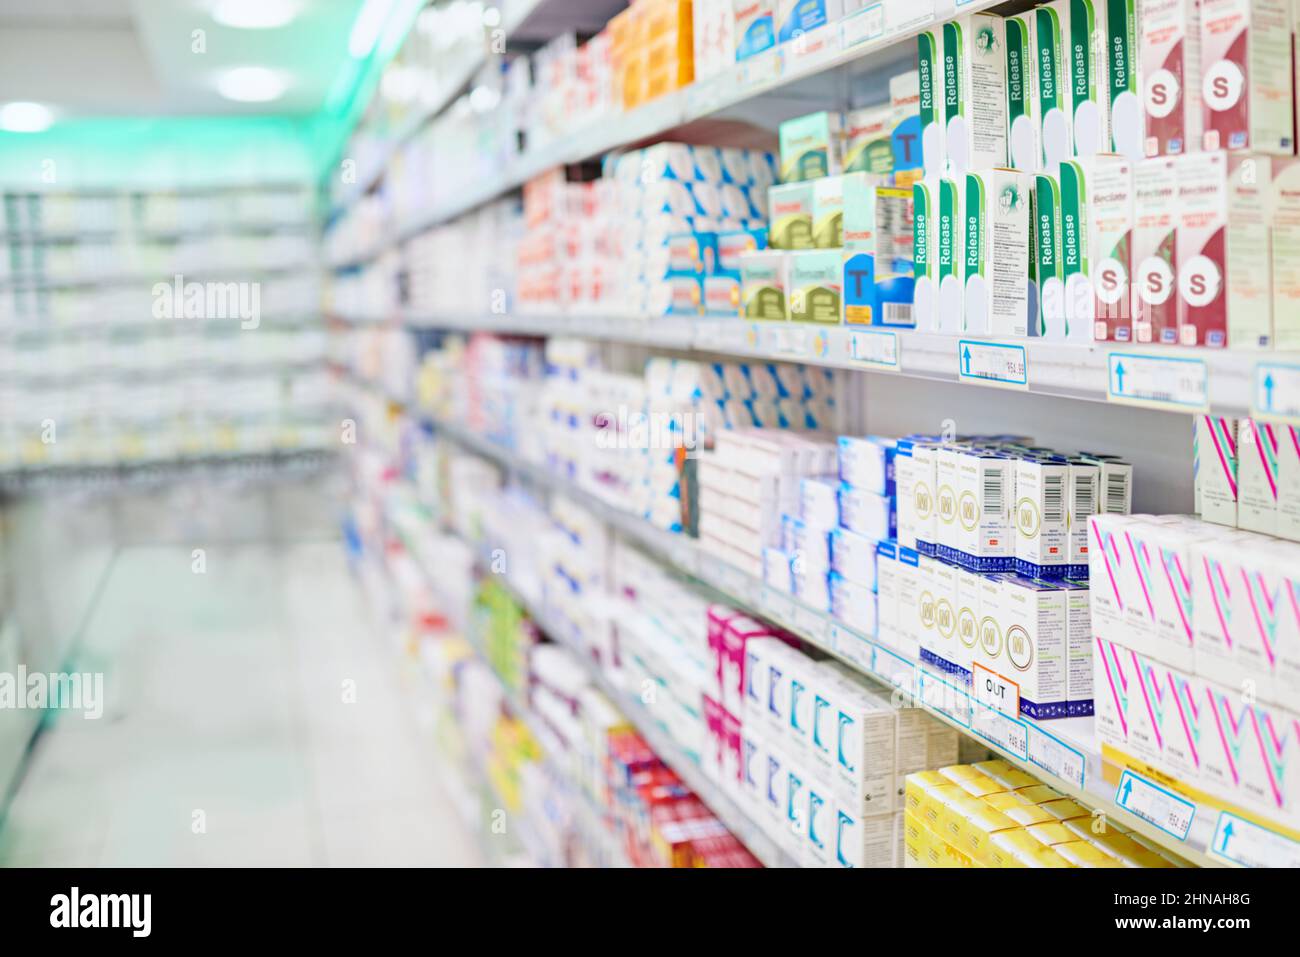 All the medicine you need. An aisle in a pharmacy. Stock Photo